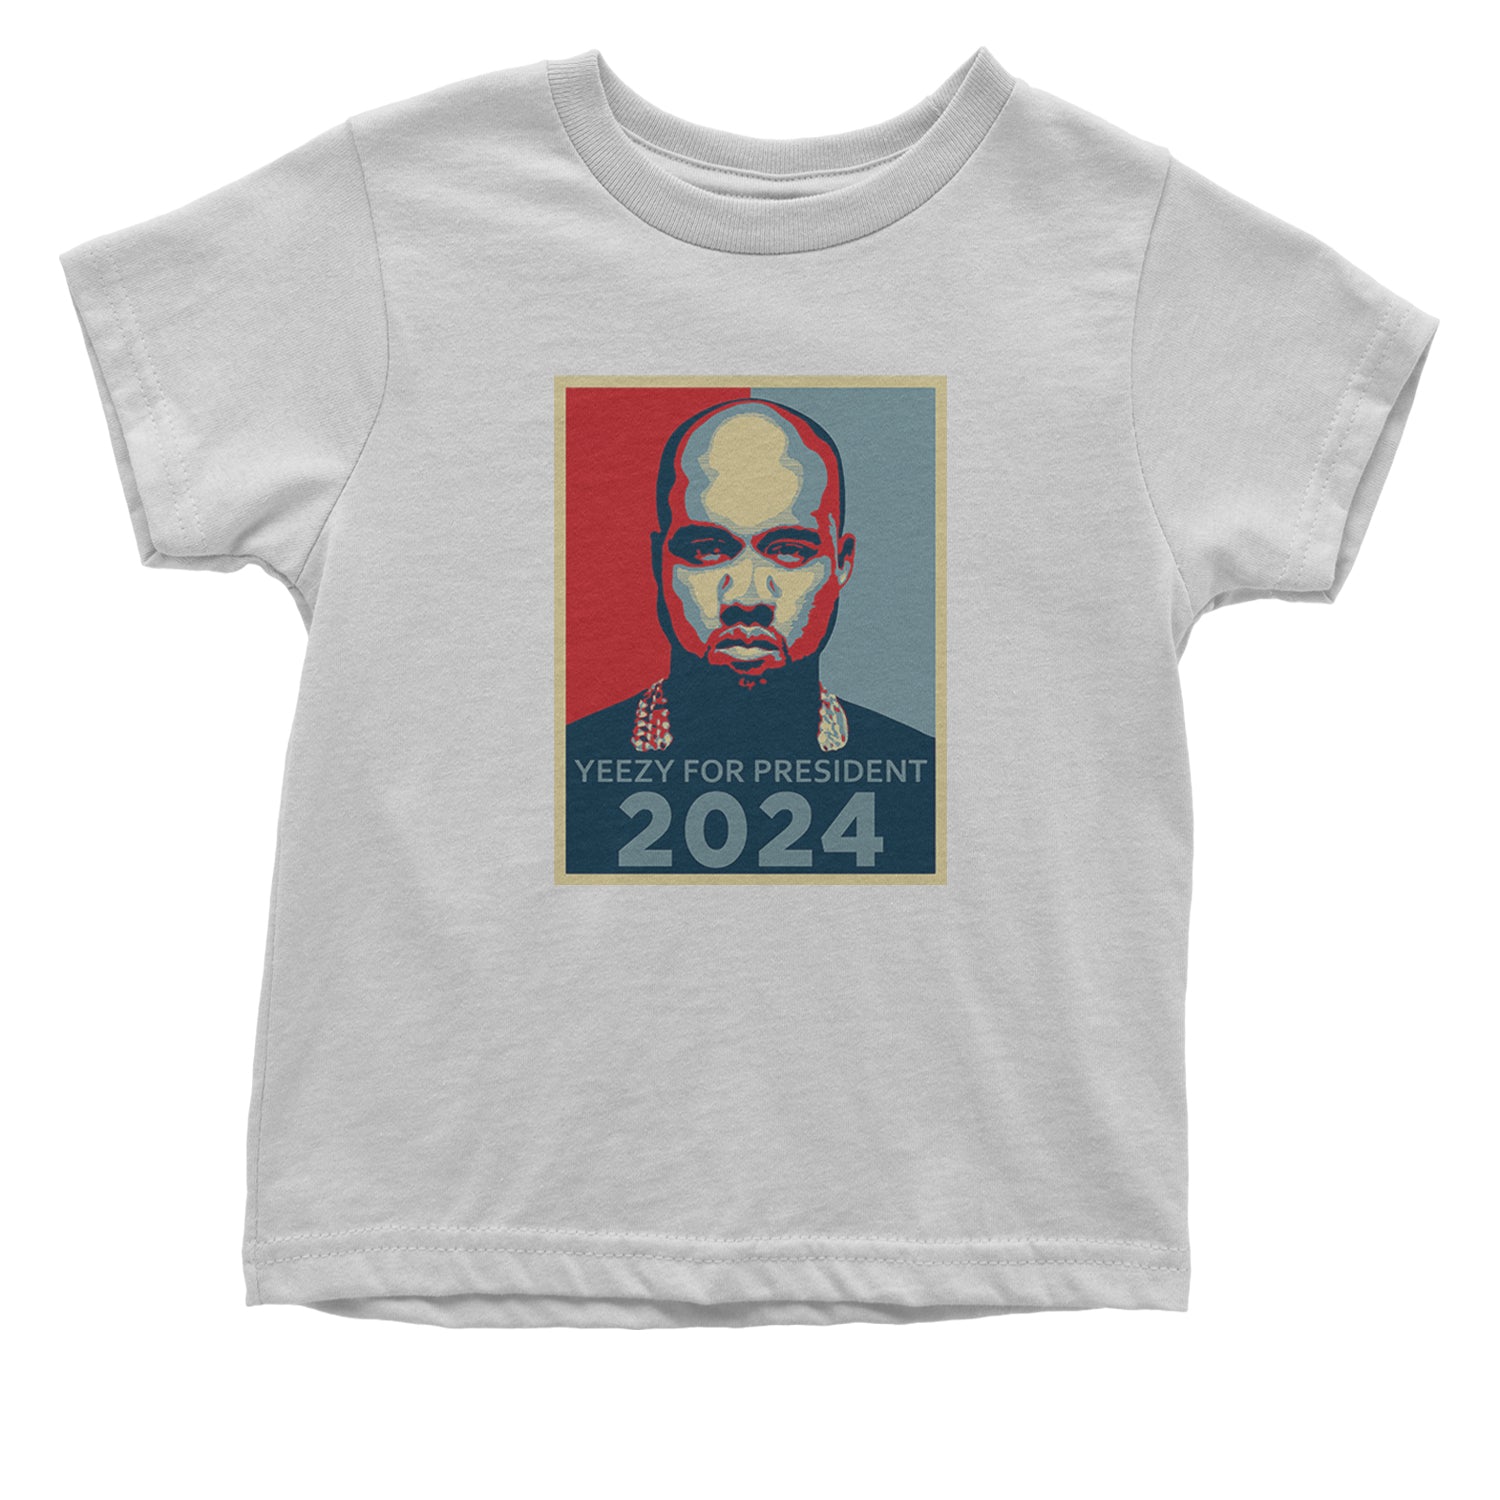 Yeezus For President Vote for Ye Infant One-Piece Romper Bodysuit and Toddler T-shirt White